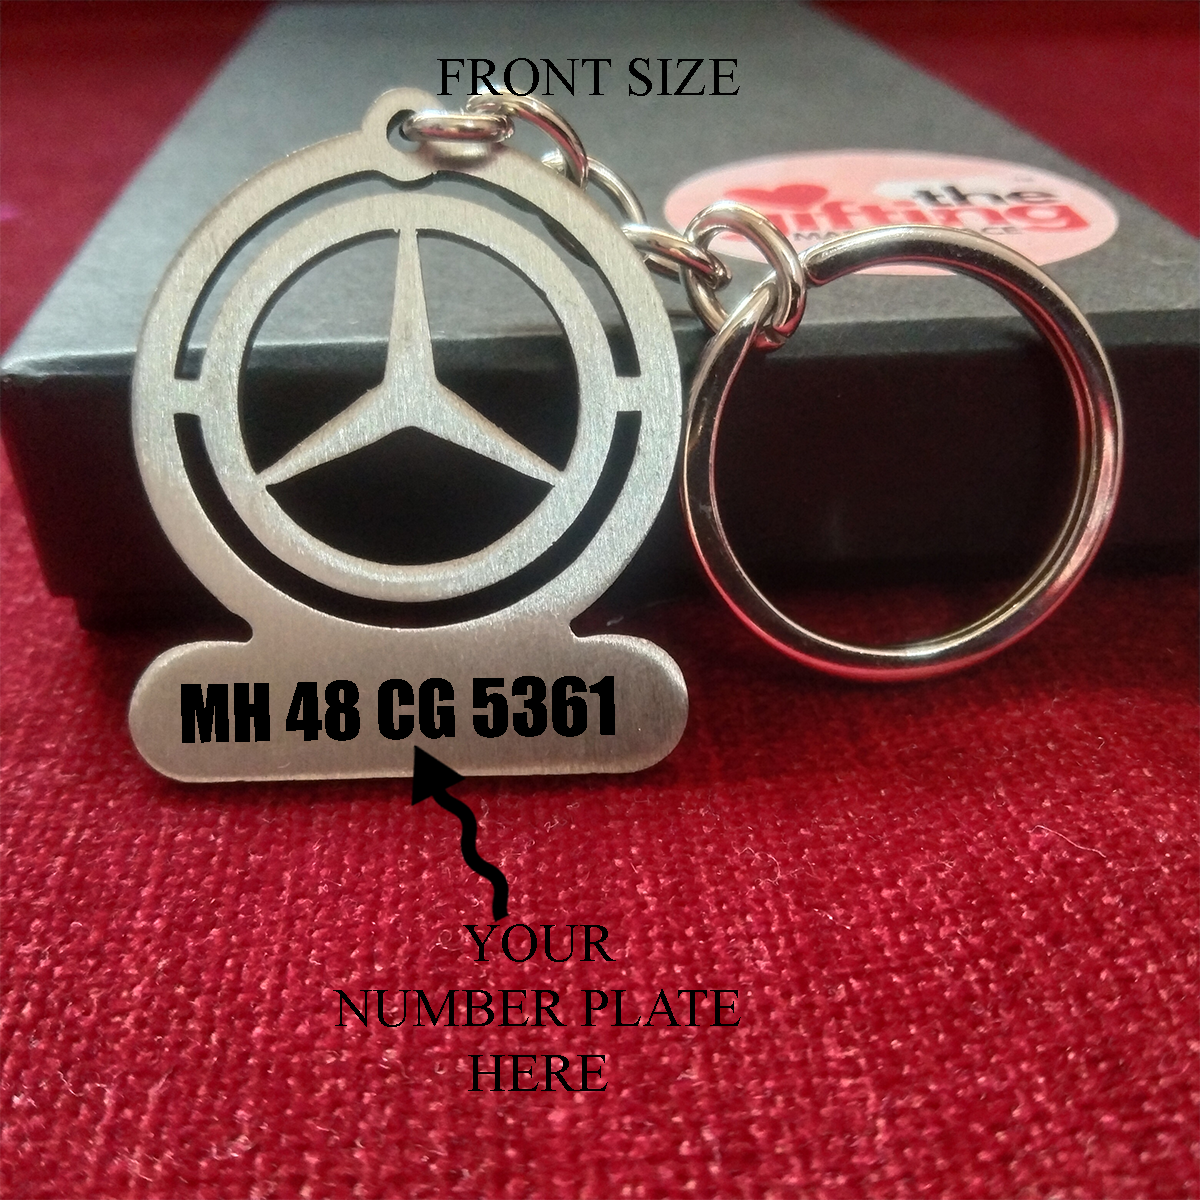 Personalized Premium Mercedes-Benz Stainless Steel Keychain with Number Plate, Name, and Phone Number Printed